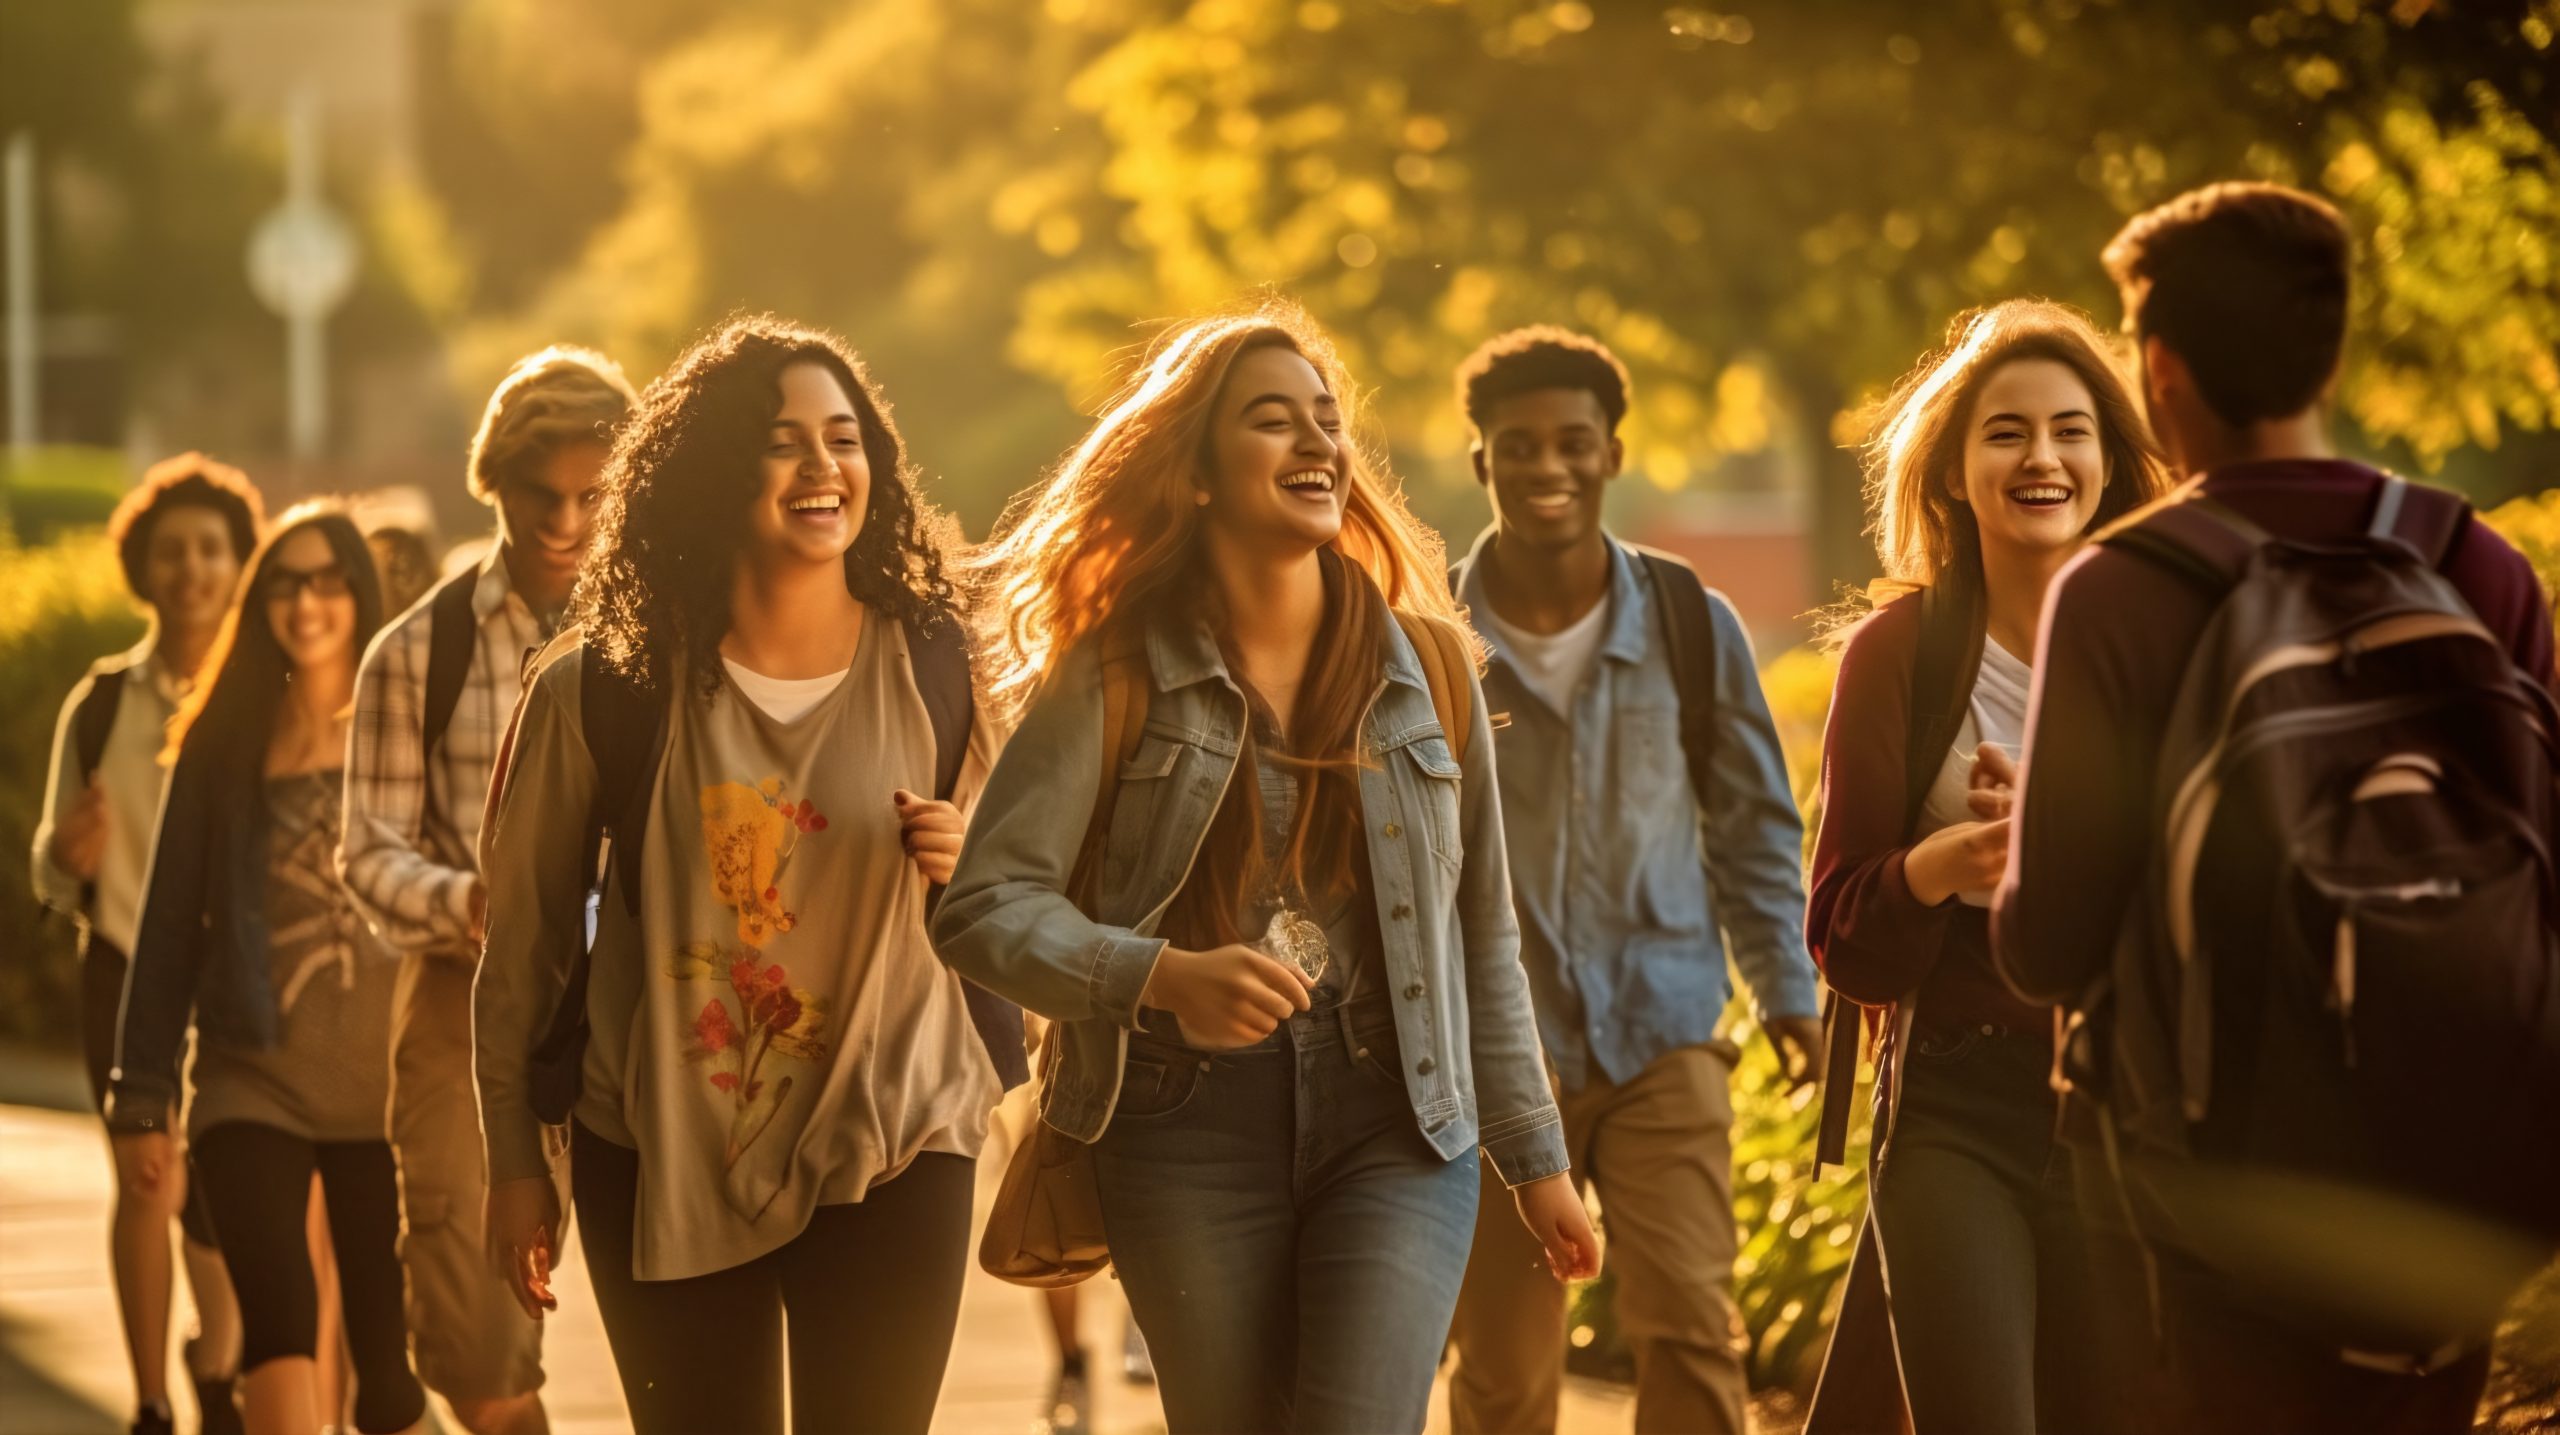 Diverse group of students laughing and walking together through a sunlit campus